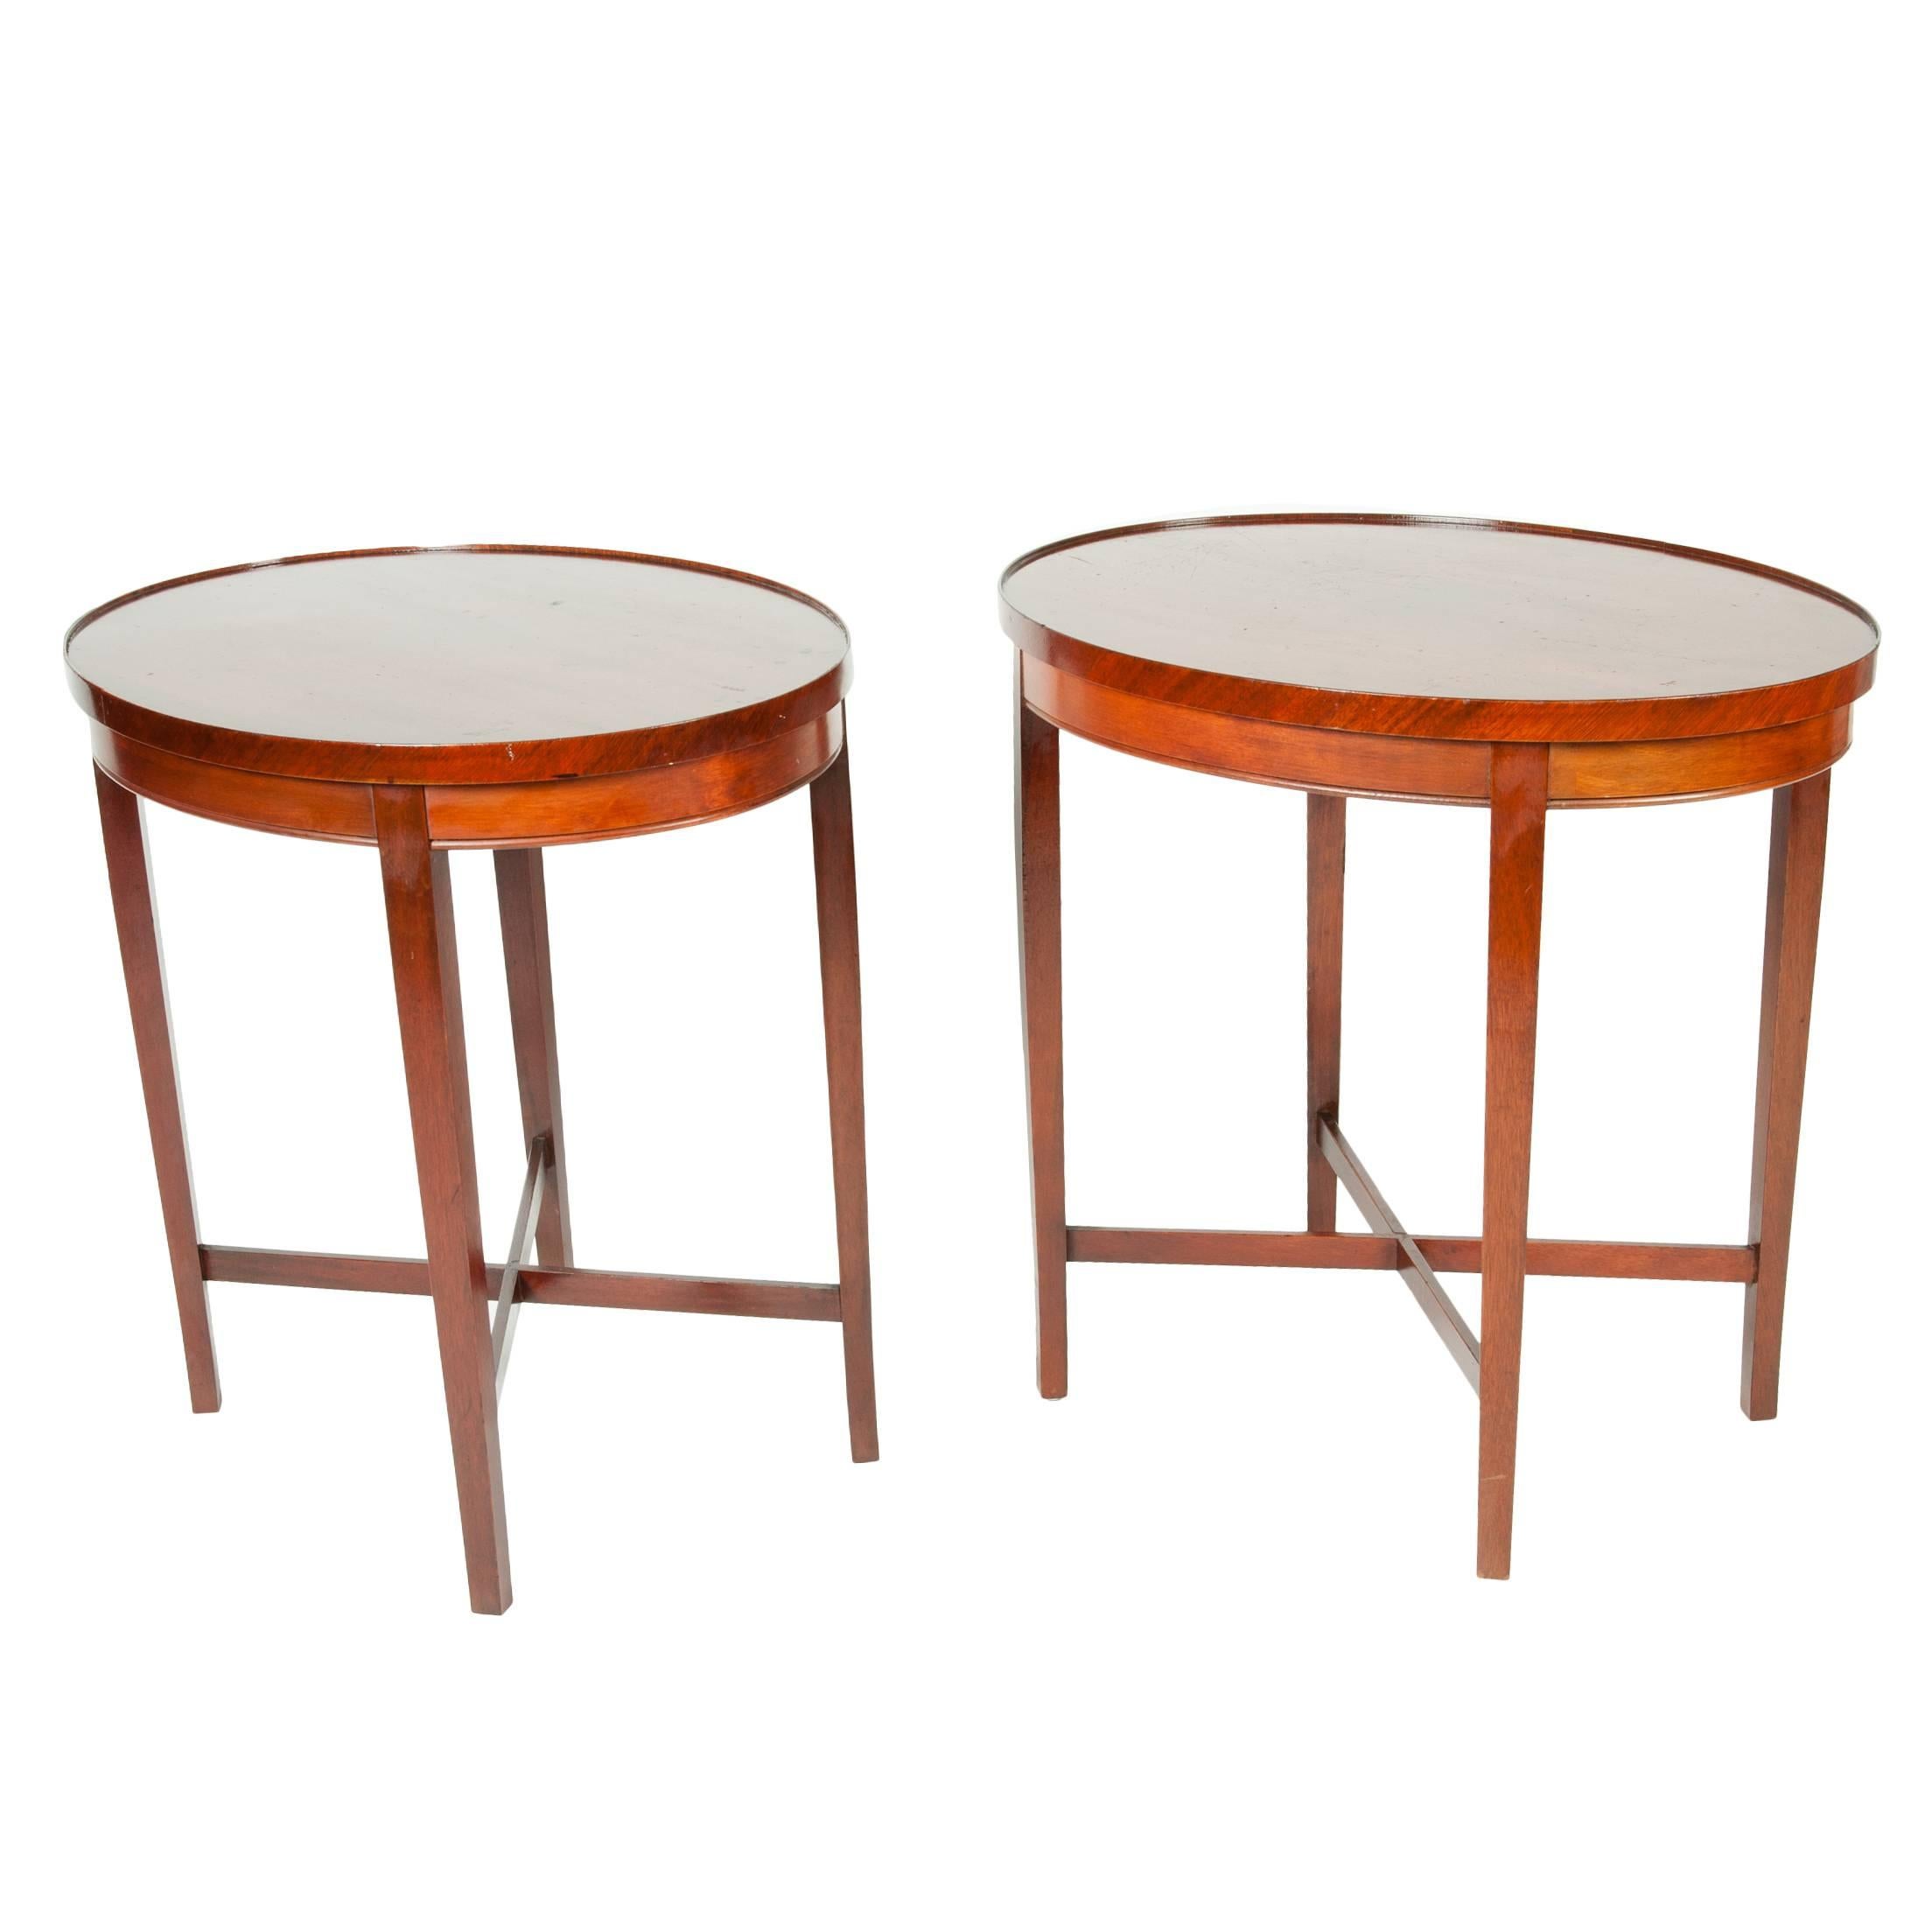 Vintage Pair of Oval Mahogany Side Tables